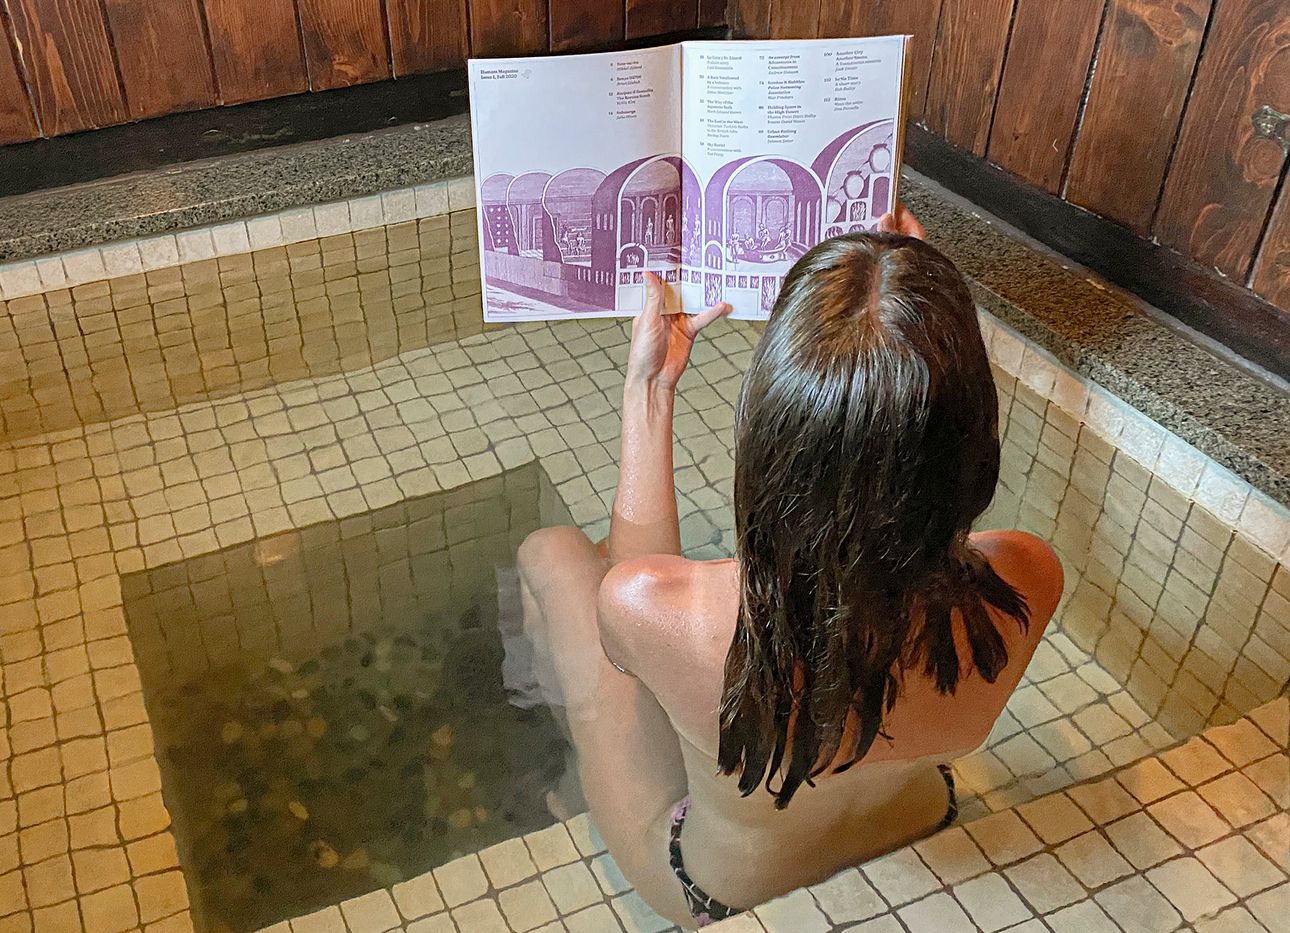 A woman reads a magazine in a hot tub wearing a swimsuit